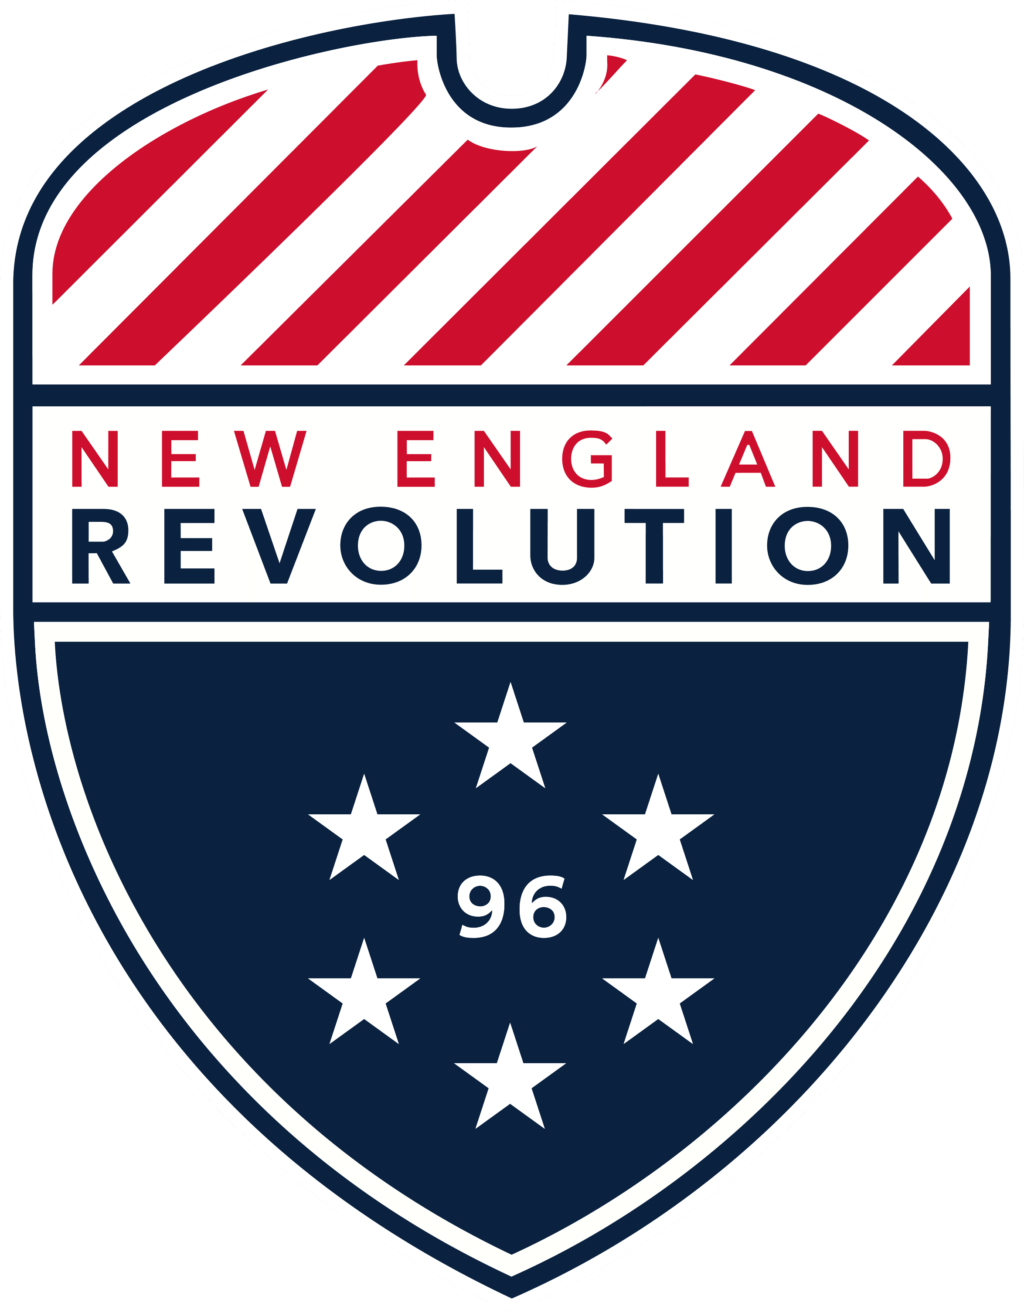 new england revolution 02 1 MLS New England Revolution SVG, SVG Files For Silhouette, New England Revolution Files For Cricut, New England Revolution SVG, DXF, EPS, PNG Instant Download. New England Revolution SVG, SVG Files For Silhouette, New England Revolution Files For Cricut, New England Revolution SVG, DXF, EPS, PNG Instant Download.